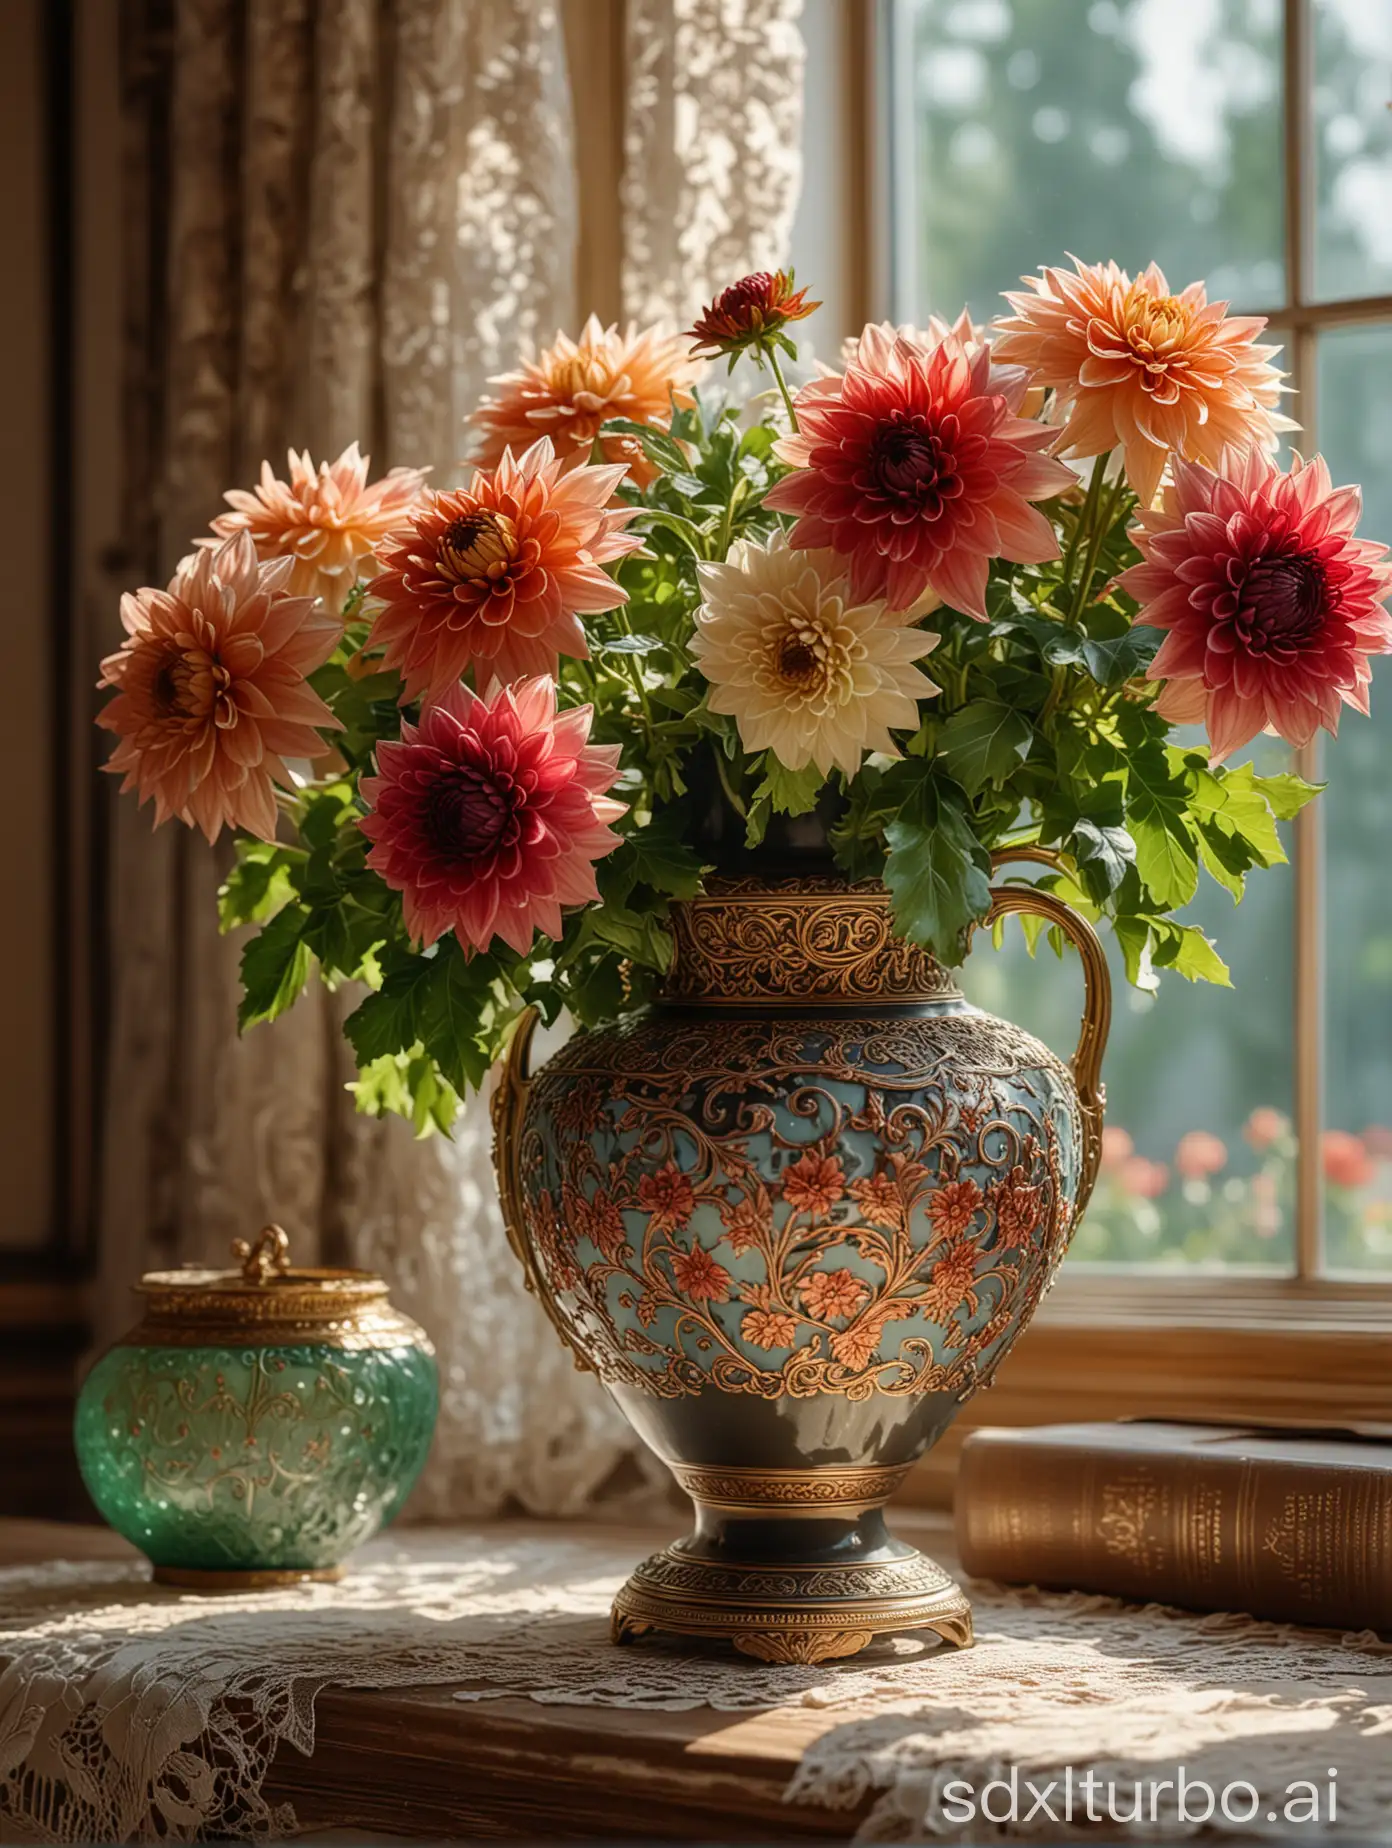 Luxuory porcelaine vase with colorful dahlias, many details, a masterpiece in the style of the works of Alphonse Mucha,lace draperies, sunlight, many details, a masterpiece,  luxuory decor vintage books, pearls emeralds, rubies, window at background, 8k realistic, intricate details, Professional photography, bokeh, natural lighting, canon lens, high contrast, high resolution intricate details, HDR, beautifully shot, hyperrealistic, sharp focus, 64 megapixels, perfect composition